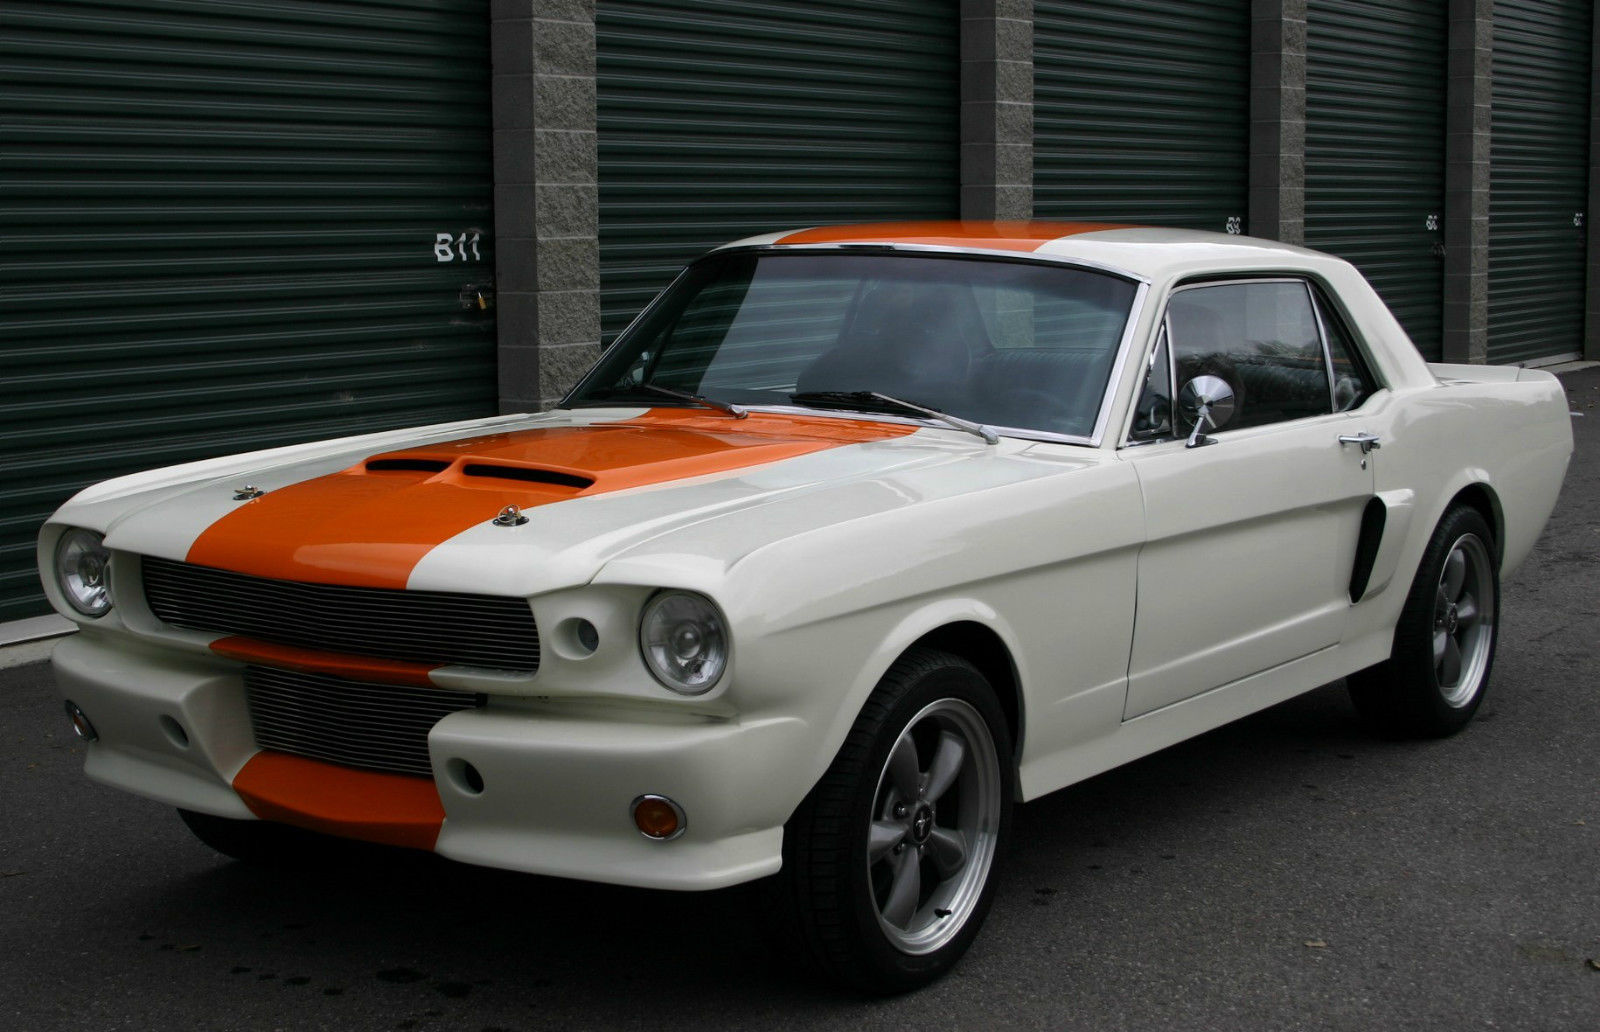 Mustang Eleanor Coupe Related Keywords & Suggestions - Musta